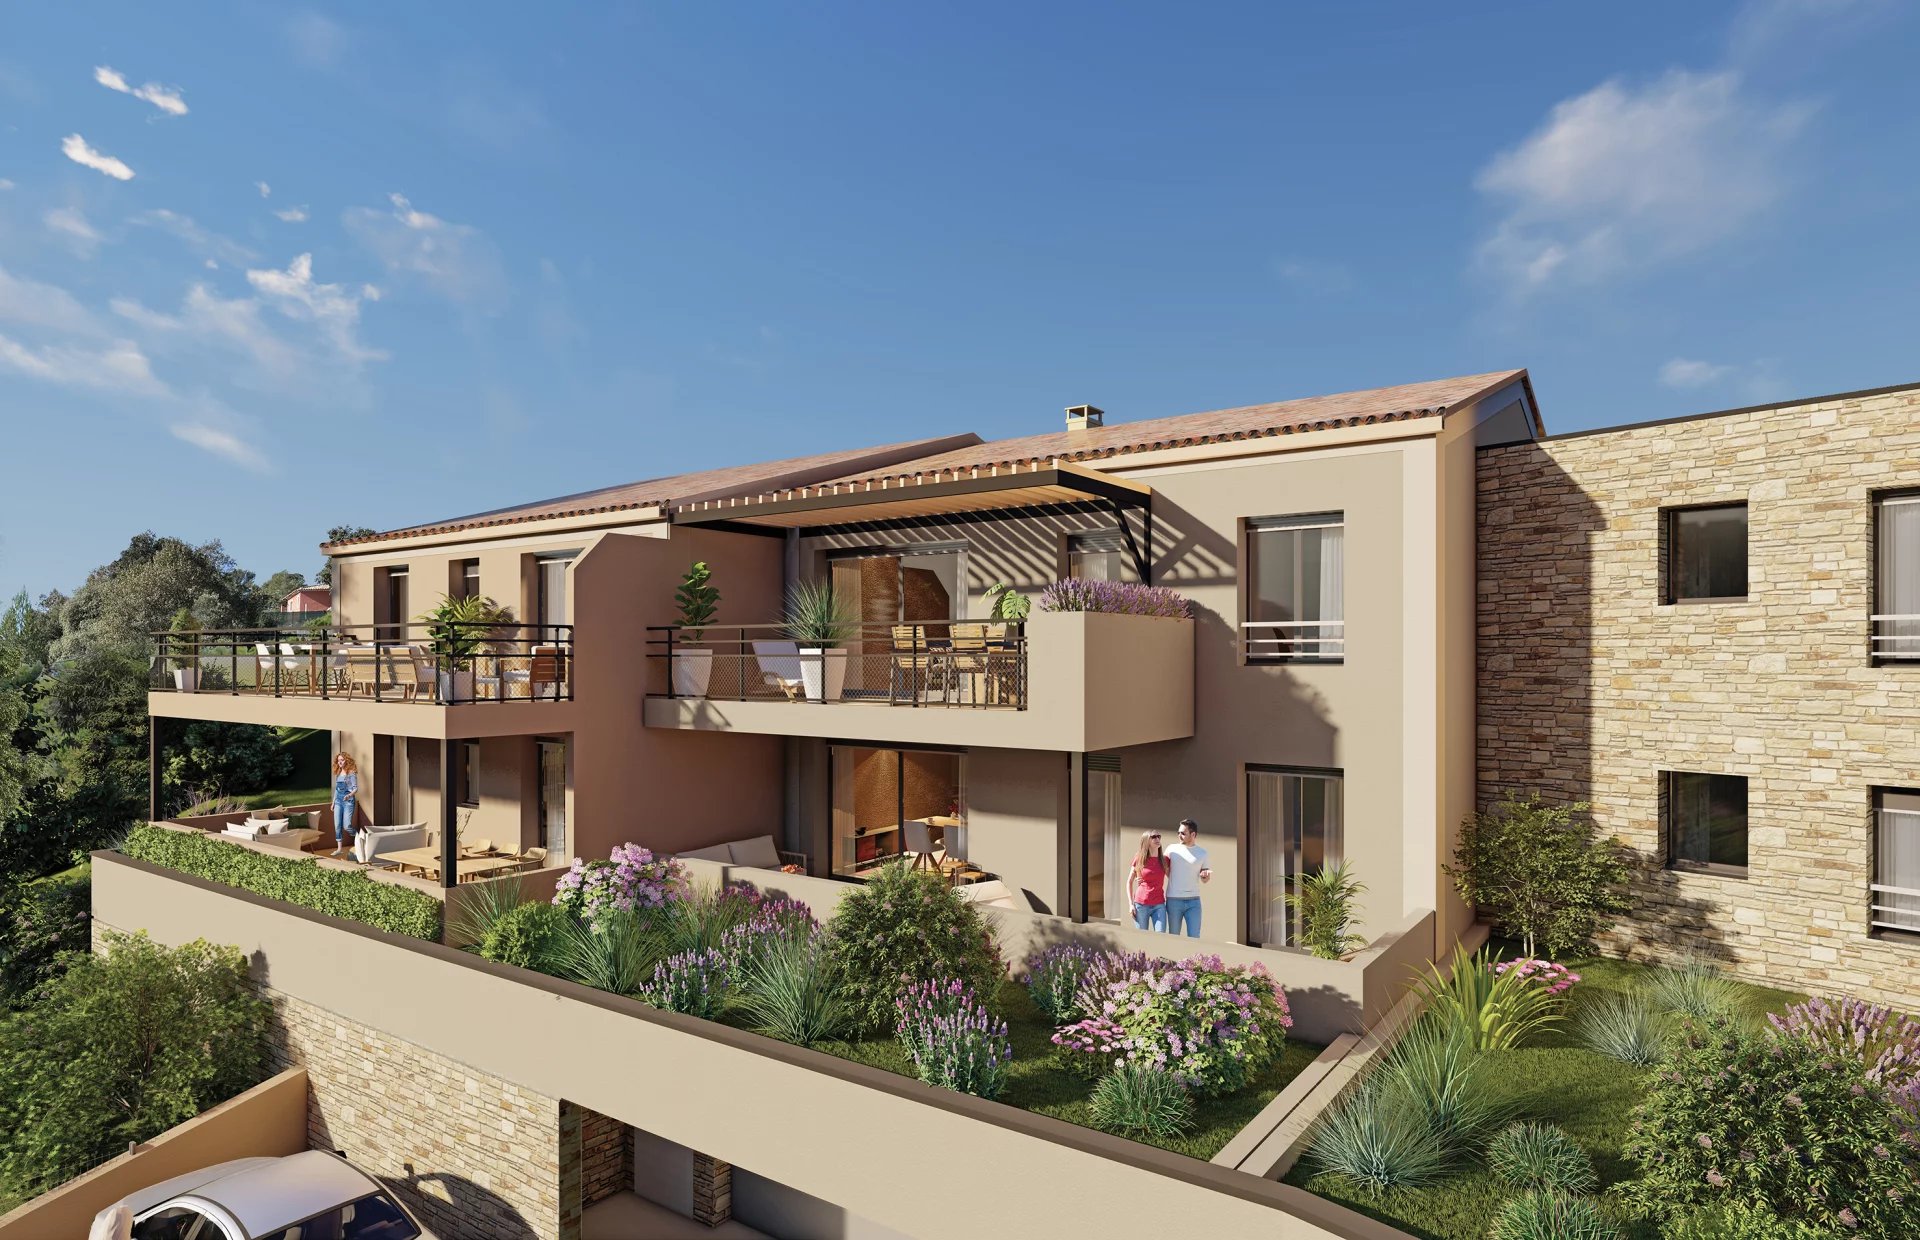 New 2-bedroom apartment with terrace - Carcès